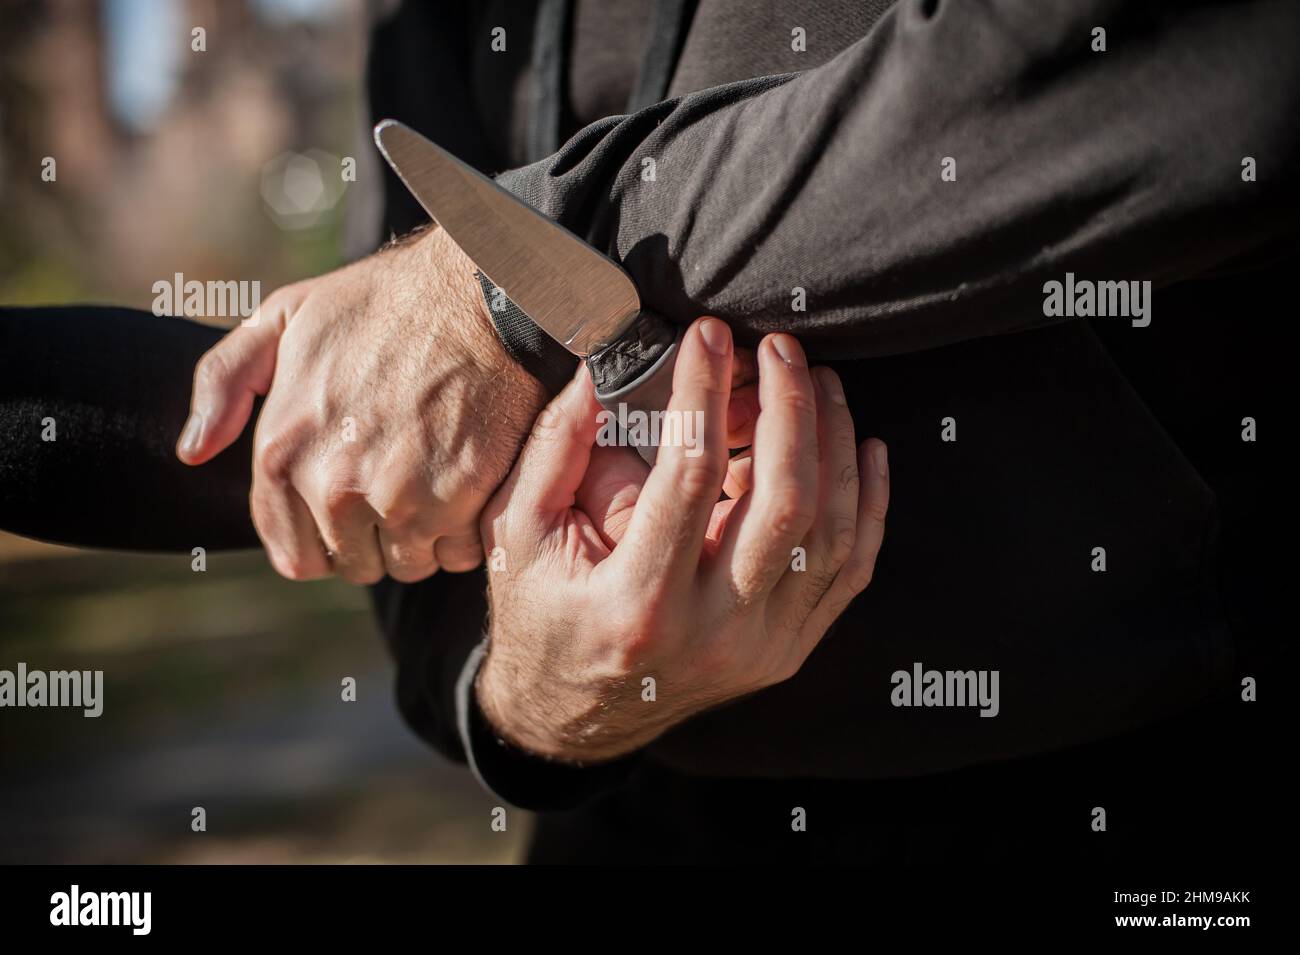 Man self defense against aggressor with knife Vector Image, self defense 